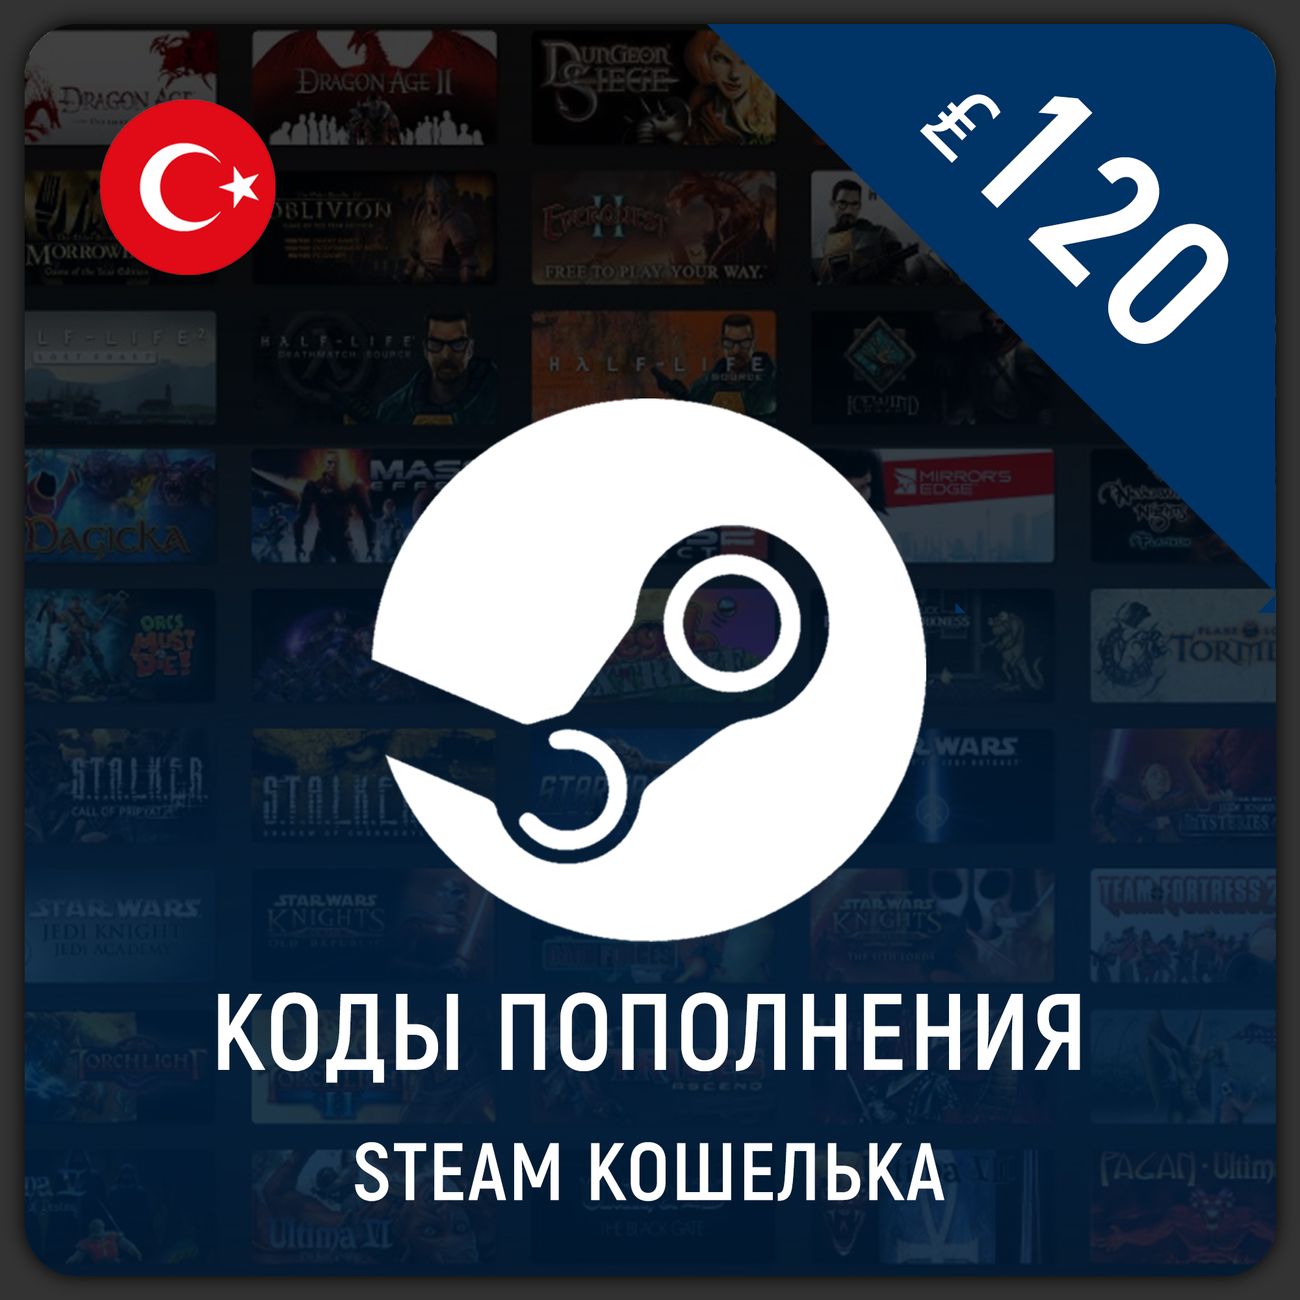 Select activate a product on steam фото 89